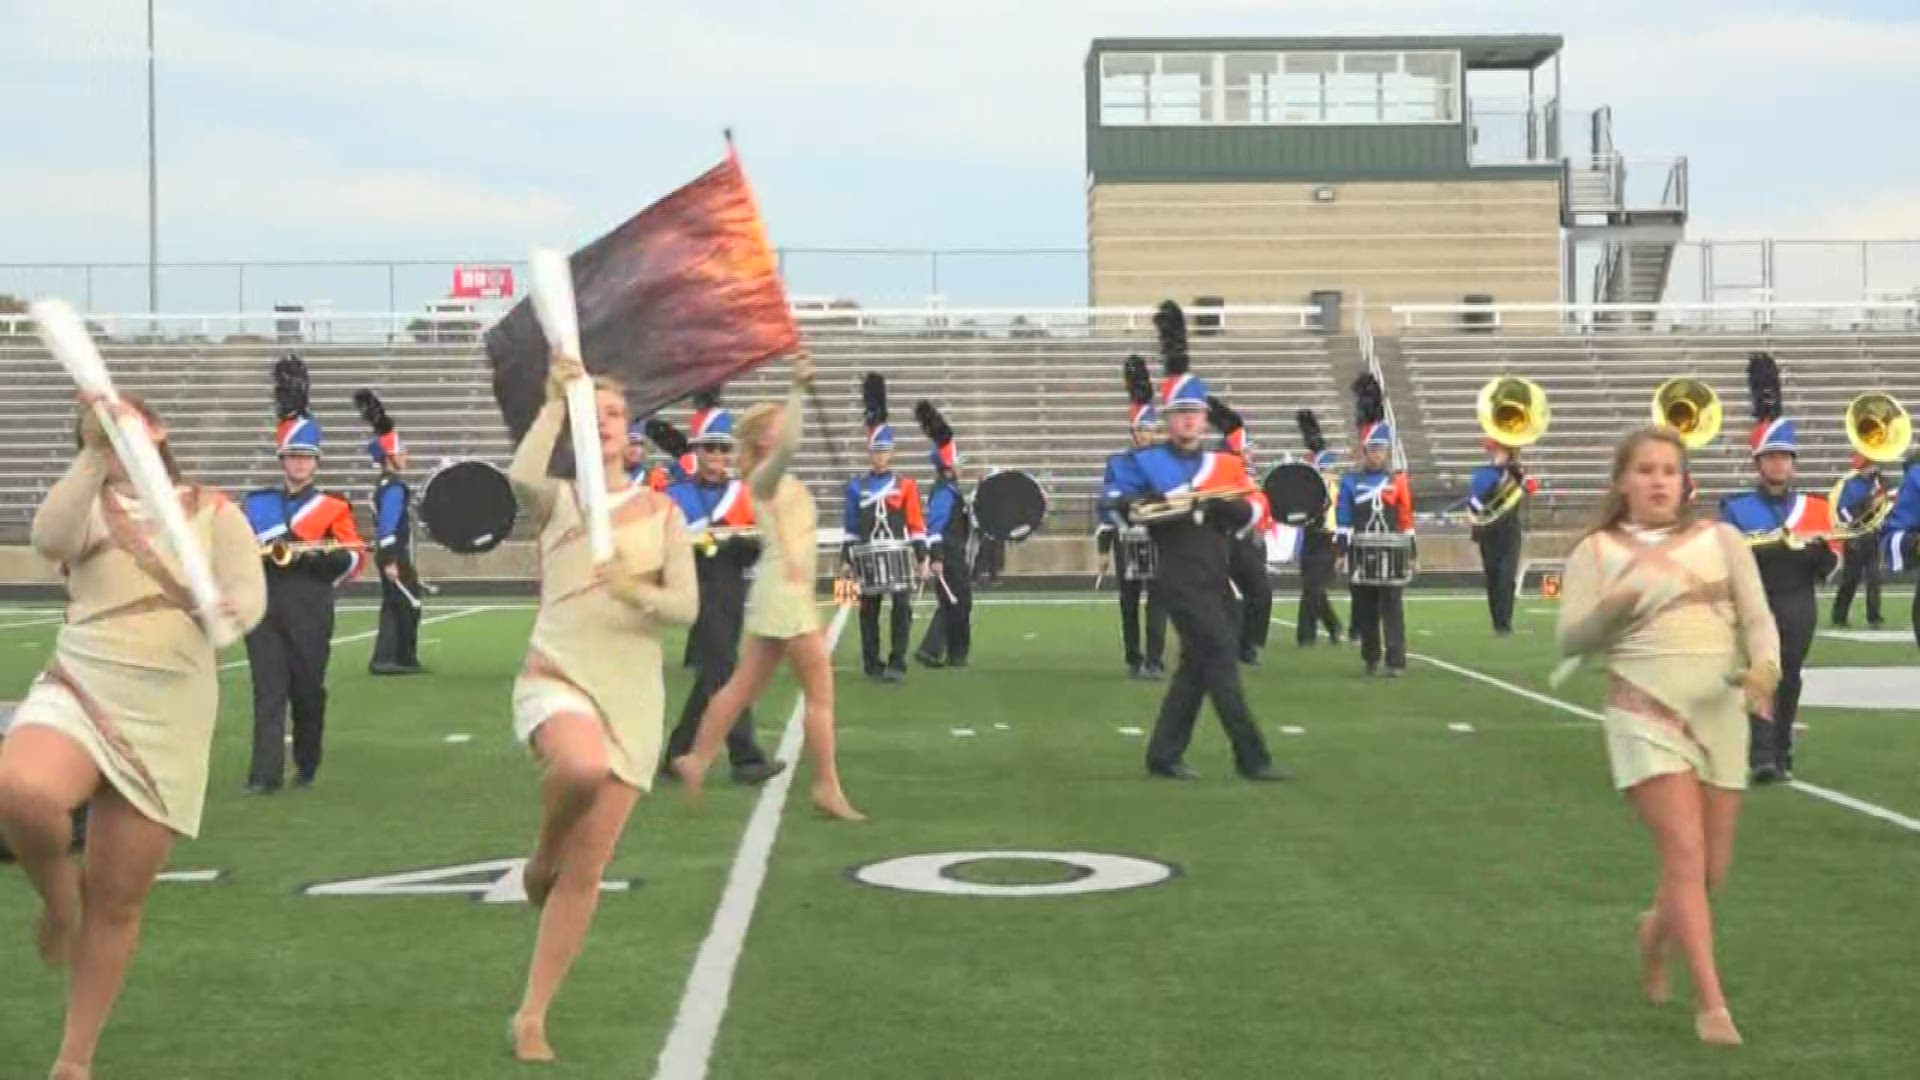 West Michigan high schools host marching band competitions